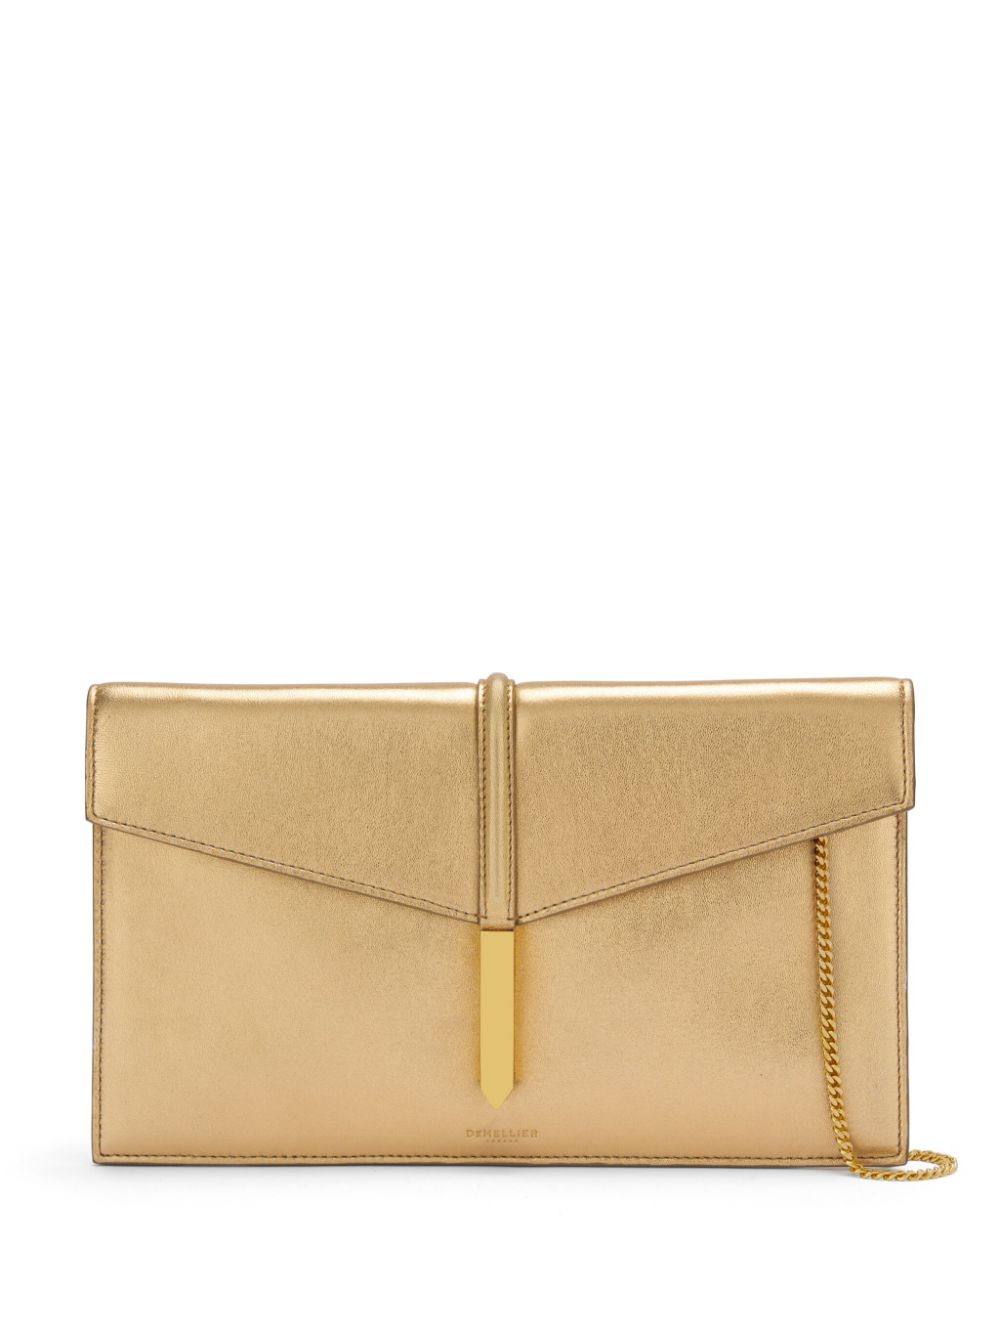 Demellier The Tokyo Leather Clutch In Neutral